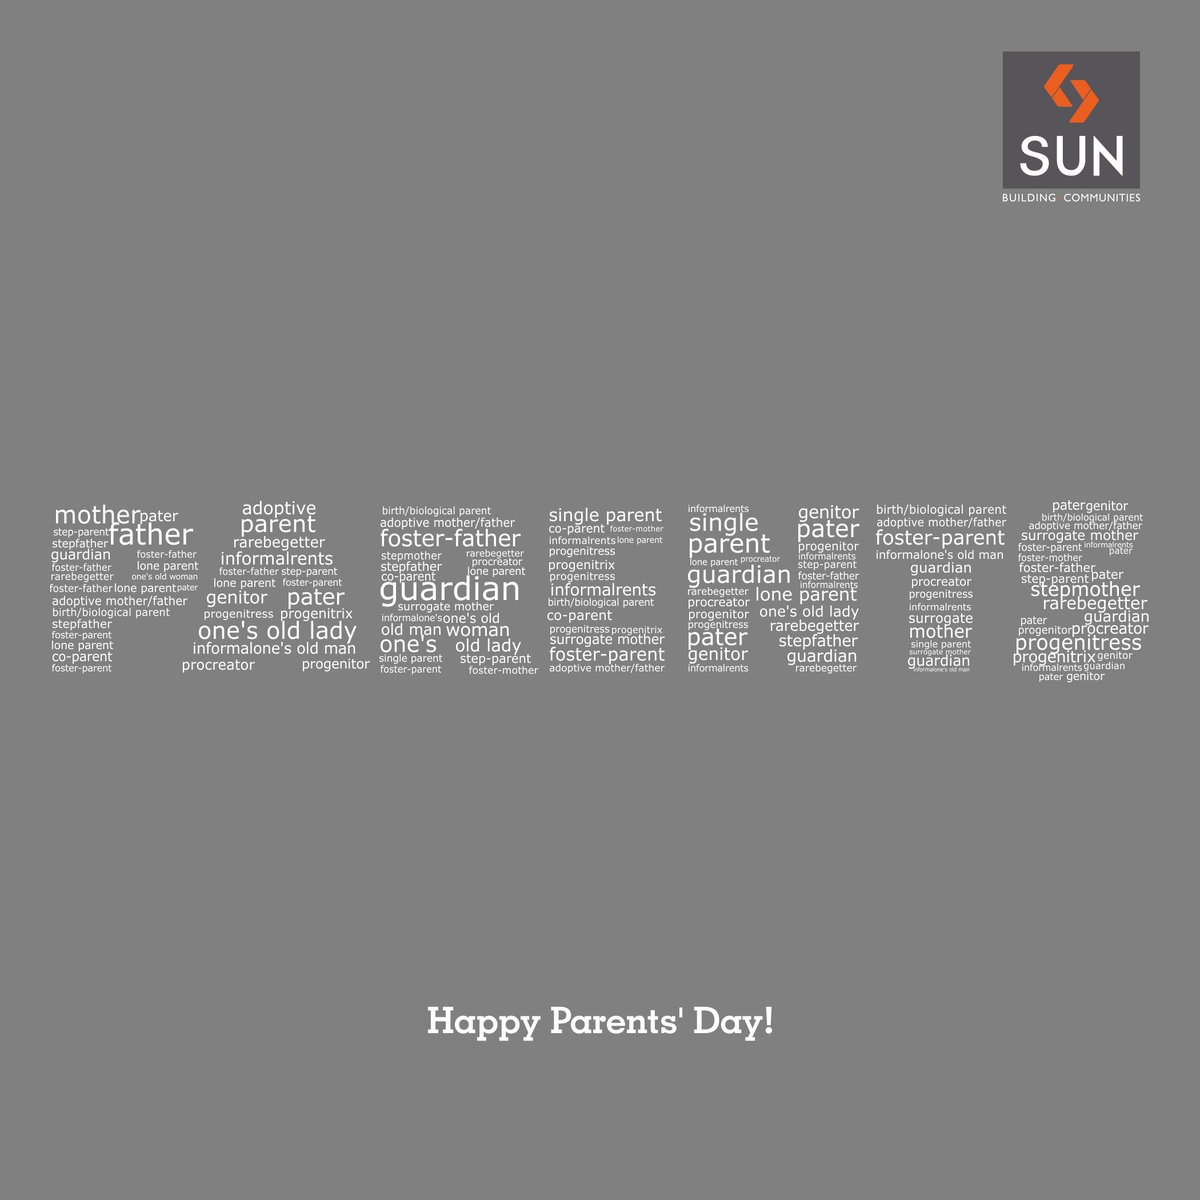 It's our parents who gave us the happiest moments of life. 
Happy Parents' Day!
#ParentsDay #happy #life https://t.co/OVrnzfl62q